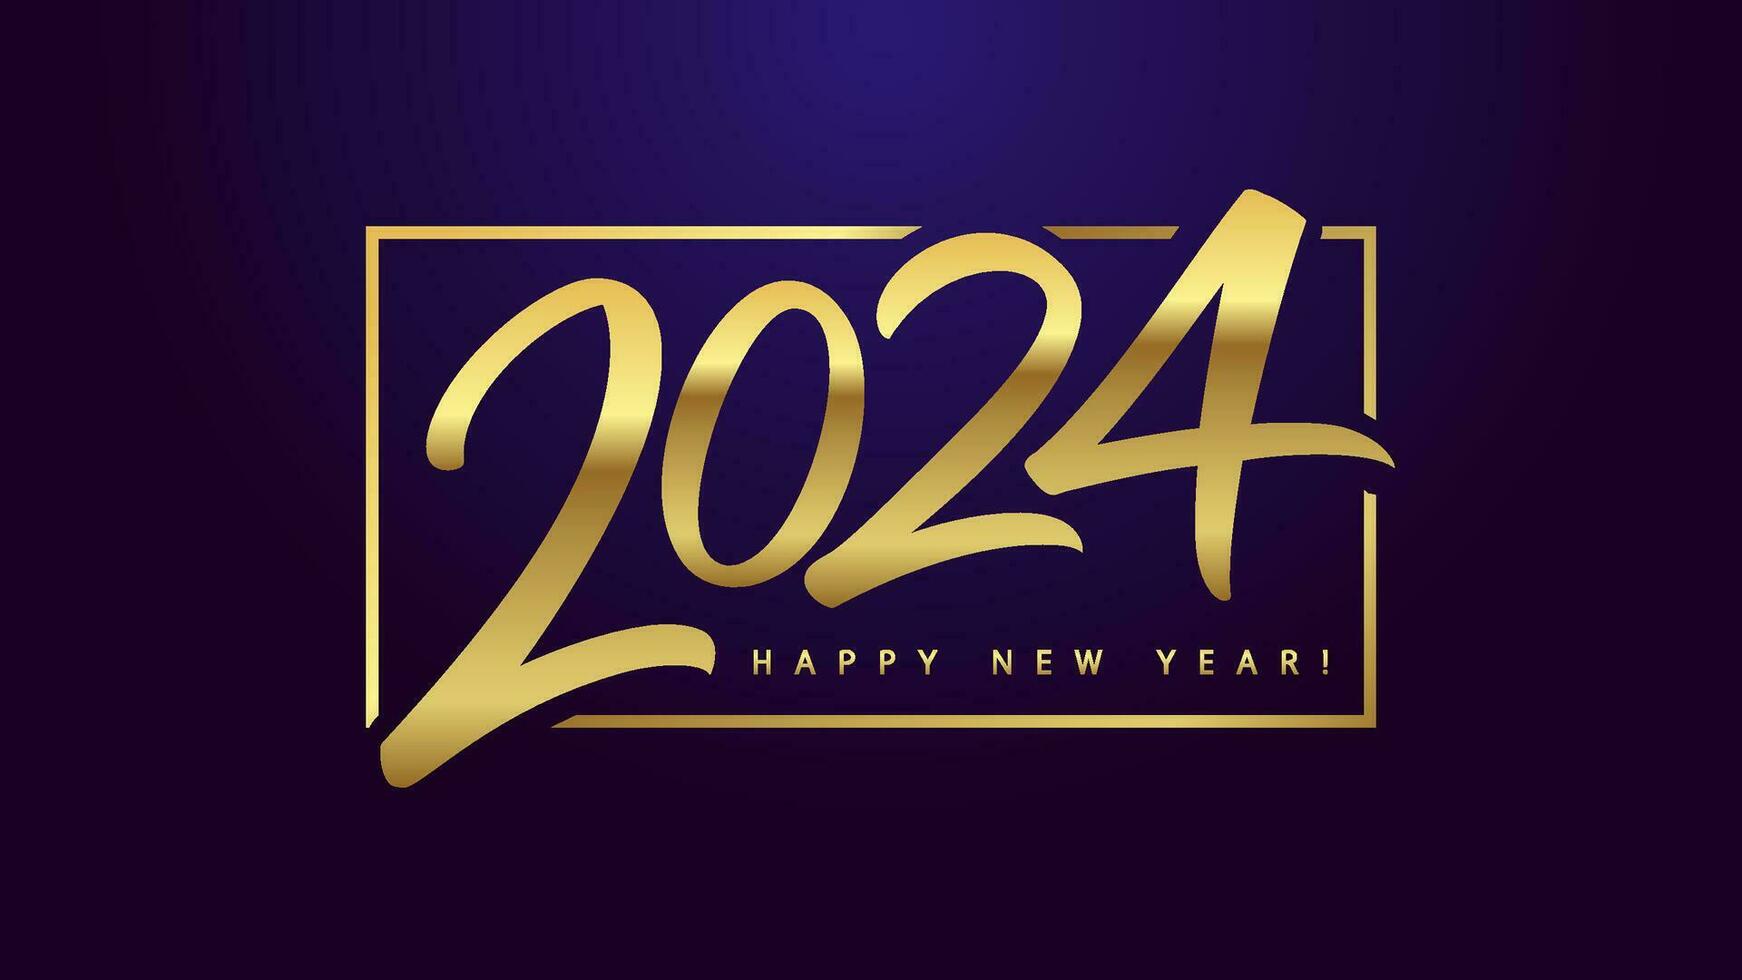 A Happy New Year 2024 horizontal golden icon. Decorative concept. Greeting card design. Creative number logo with shiny gold gragient. Luxury design. Background and text concept. Holiday eve emblem. vector